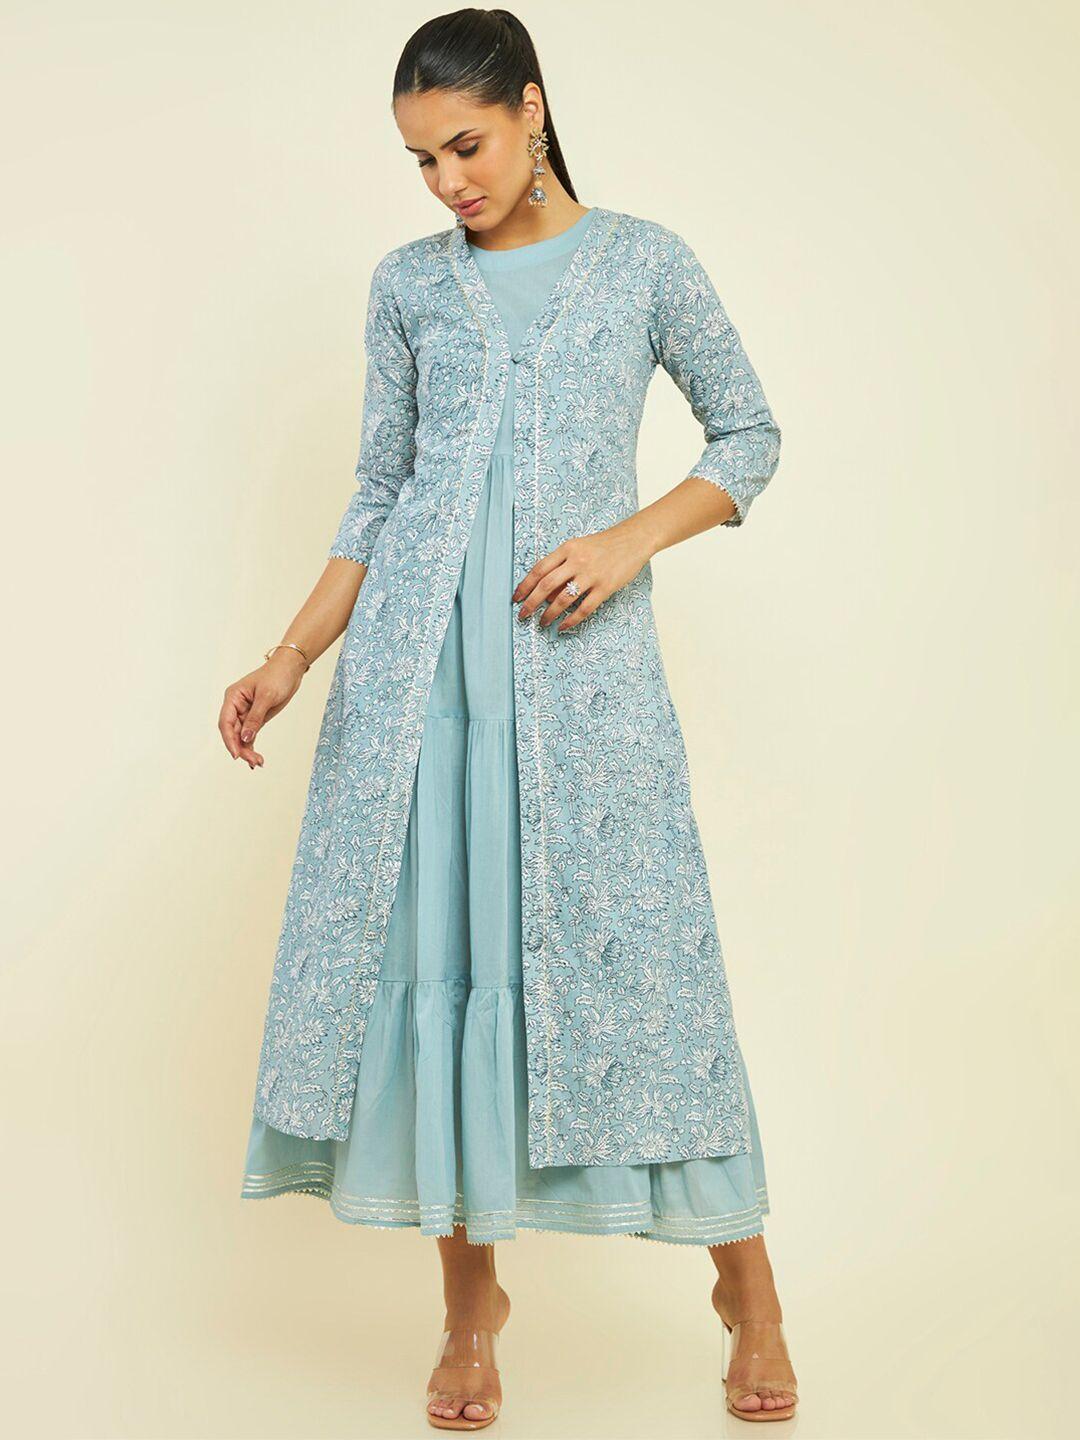 soch-tiered-cotton-fit-and-flare-ethnic-dress-with-printed-longline-jacket